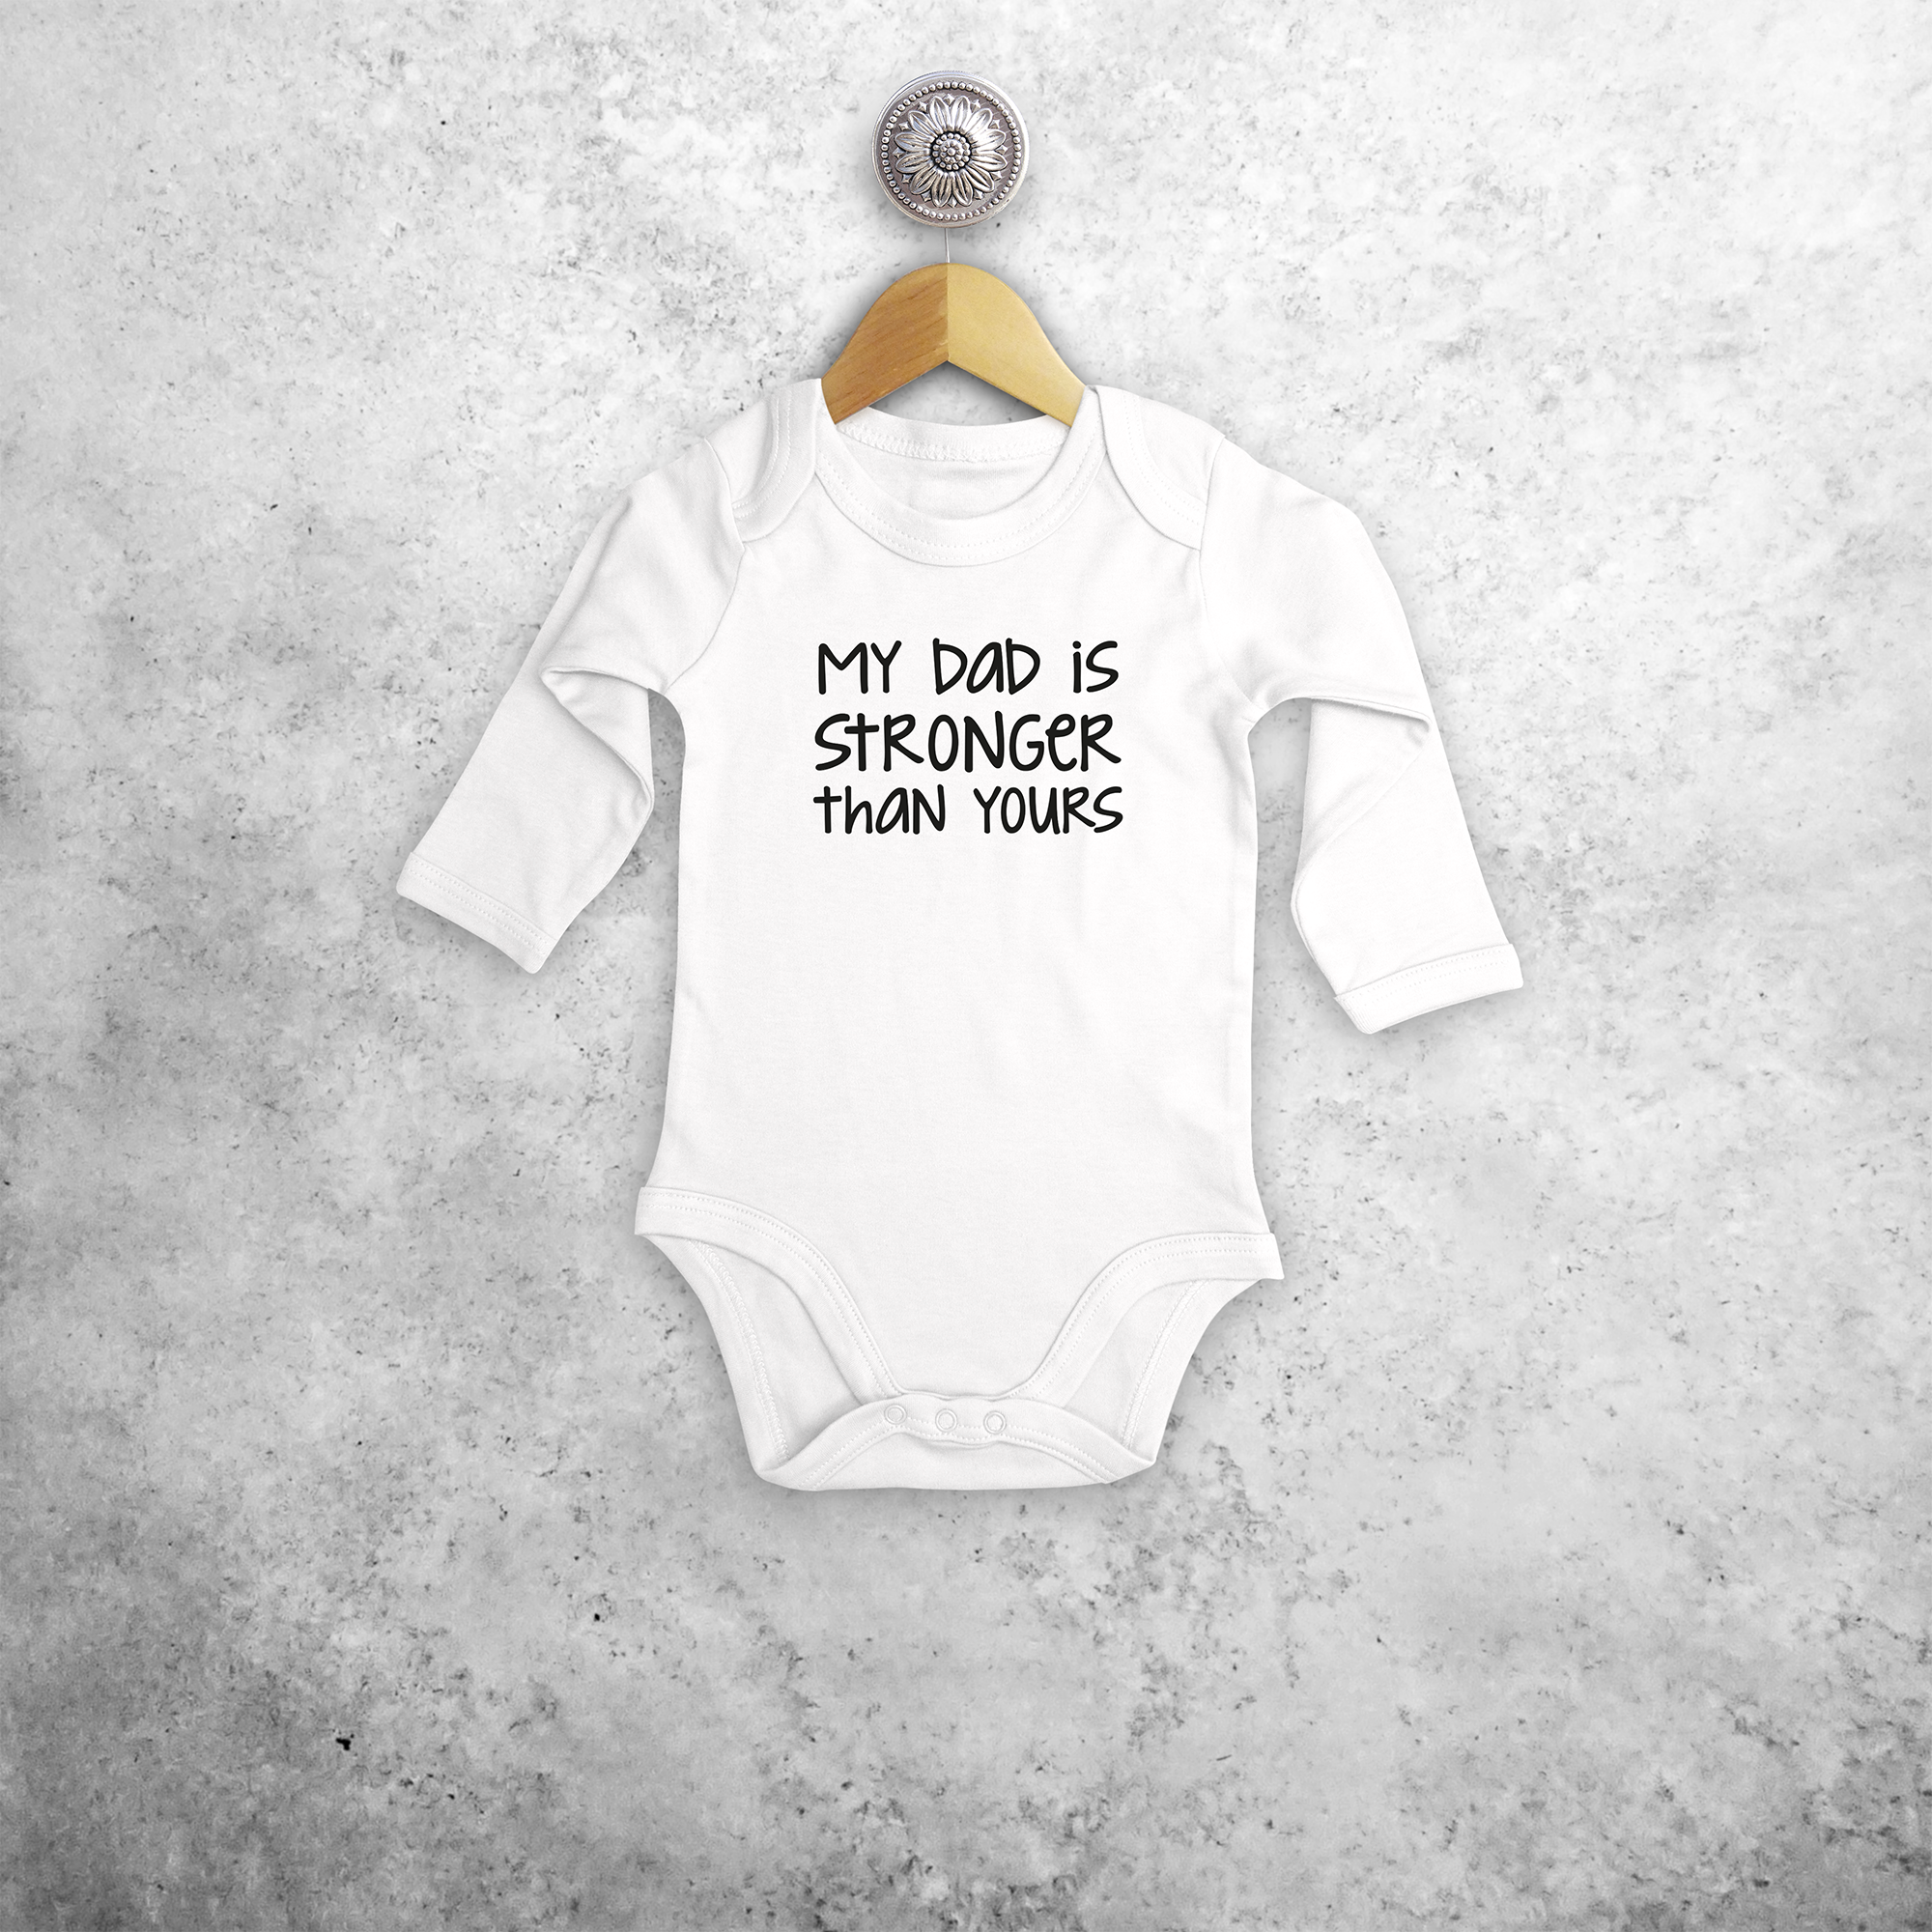 'My dad is stronger than yours' baby longsleeve bodysuit